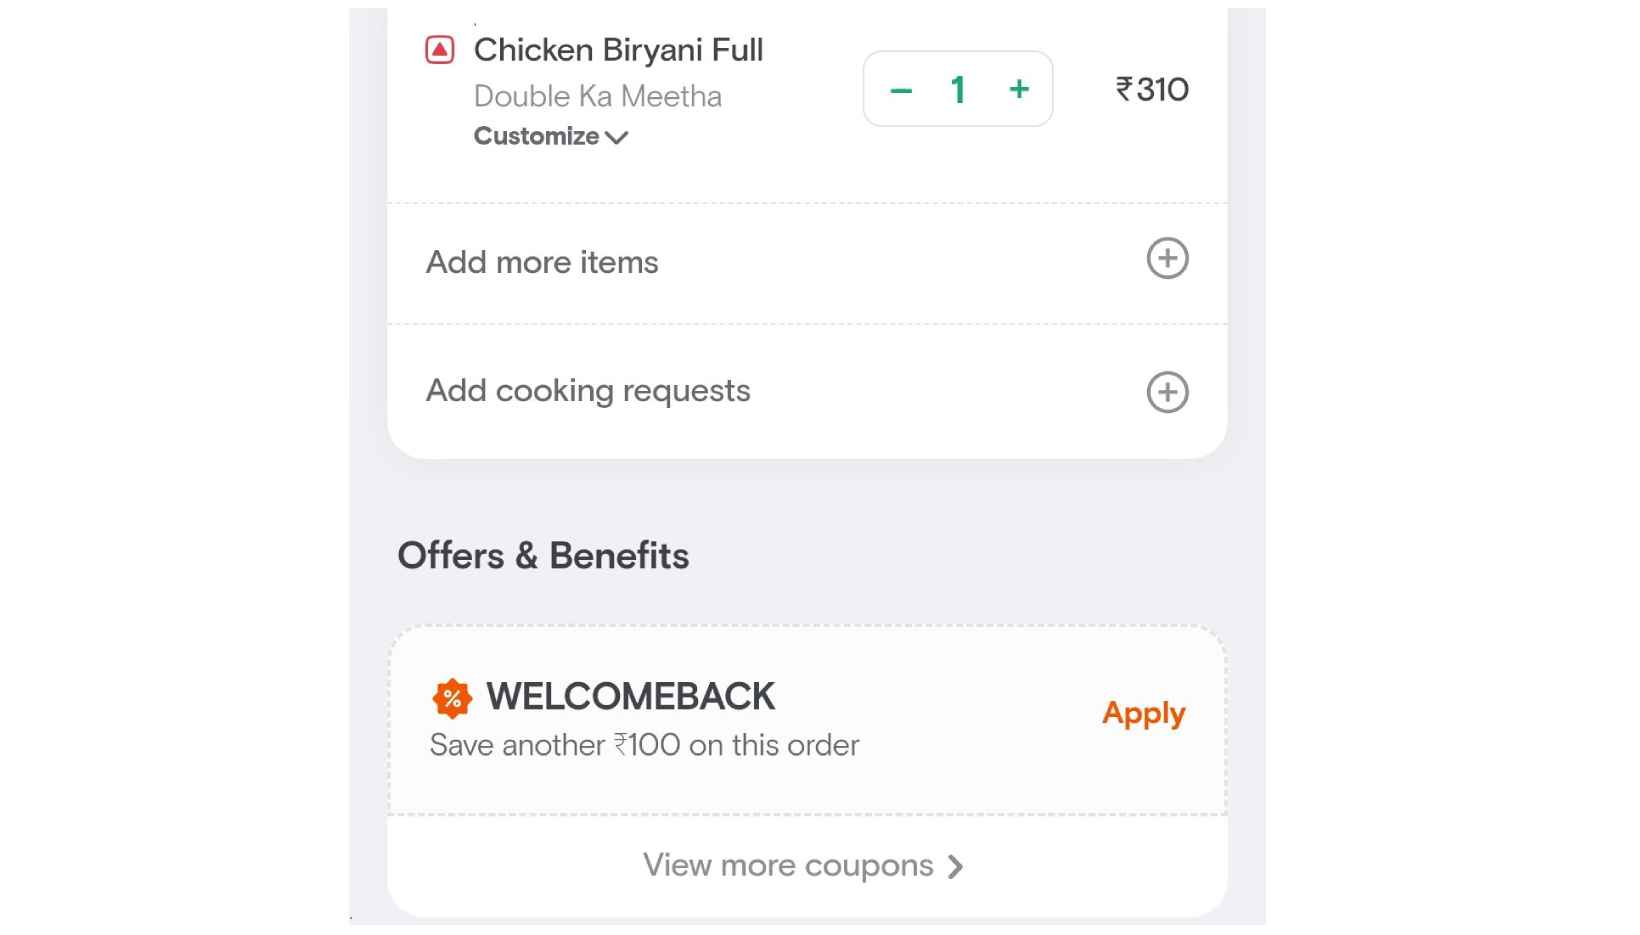 How to Use Swiggy Coupon Code